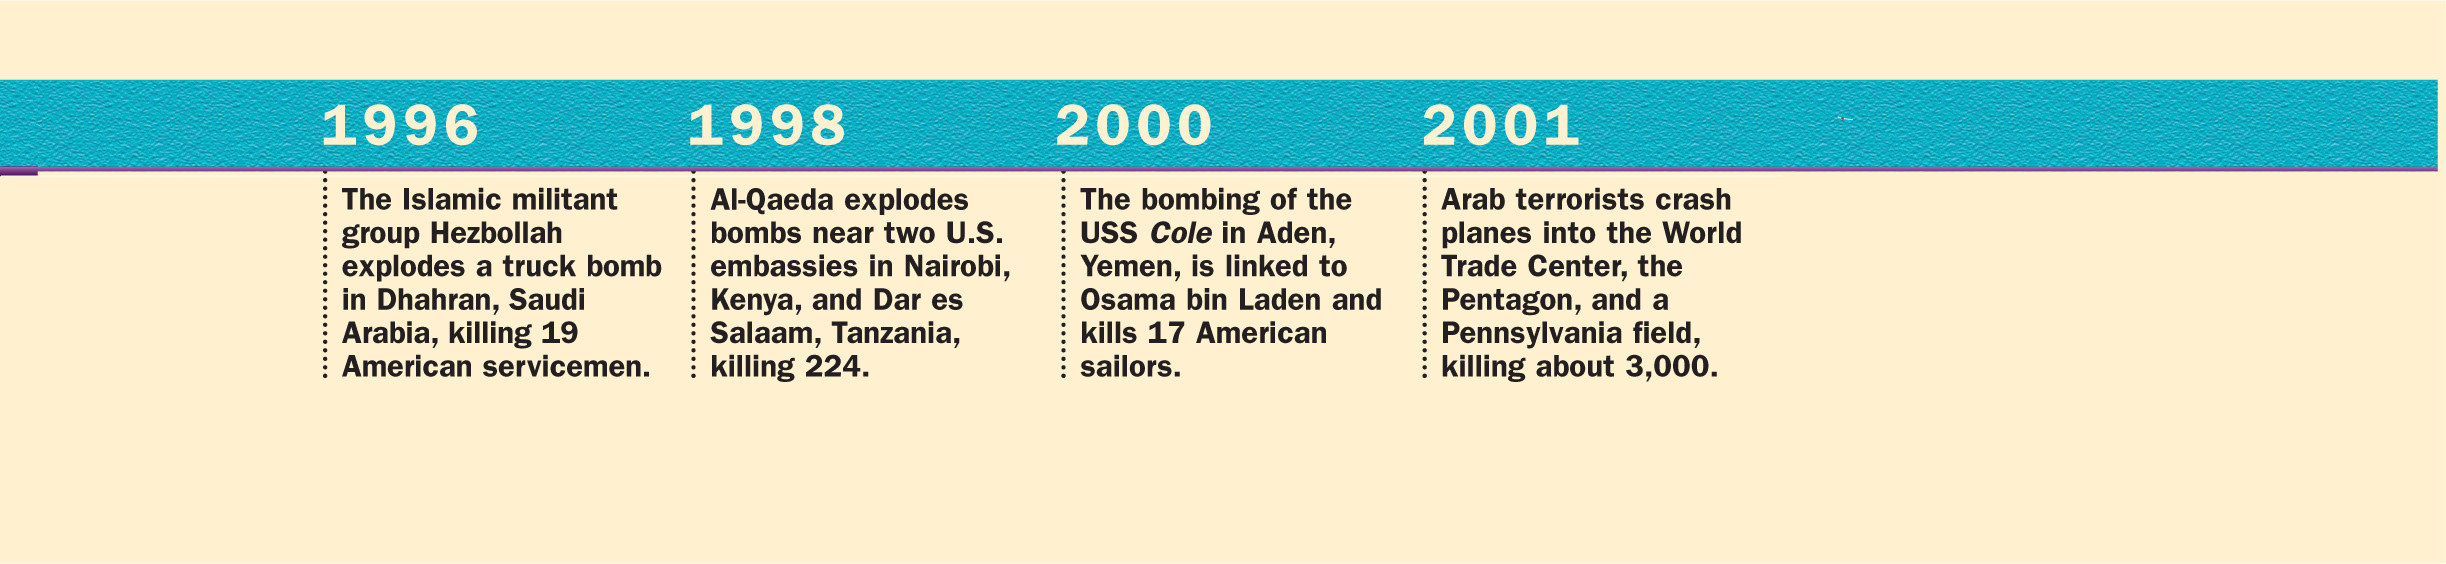 A timeline lists terrorist attacks from 1978 to 2001.